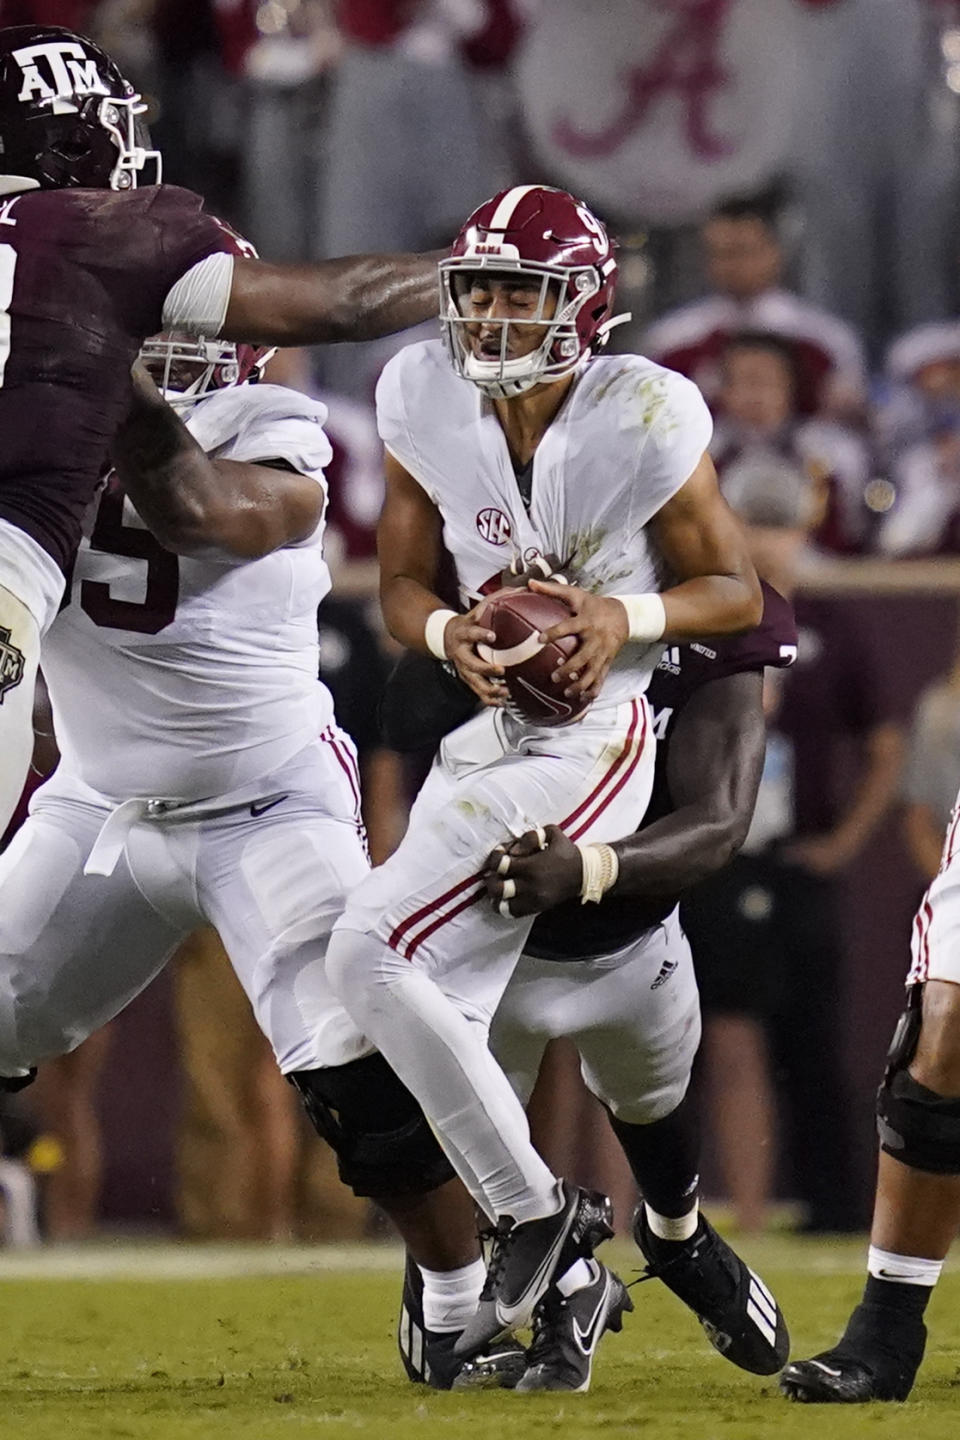 Texas A&M defensive lineman Tyree Johnson, rear, sacks Alabama quarterback Bryce Young during the first half of an NCAA college football game on Saturday, Oct. 9, 2021, in College Station, Texas. (AP Photo/Sam Craft)